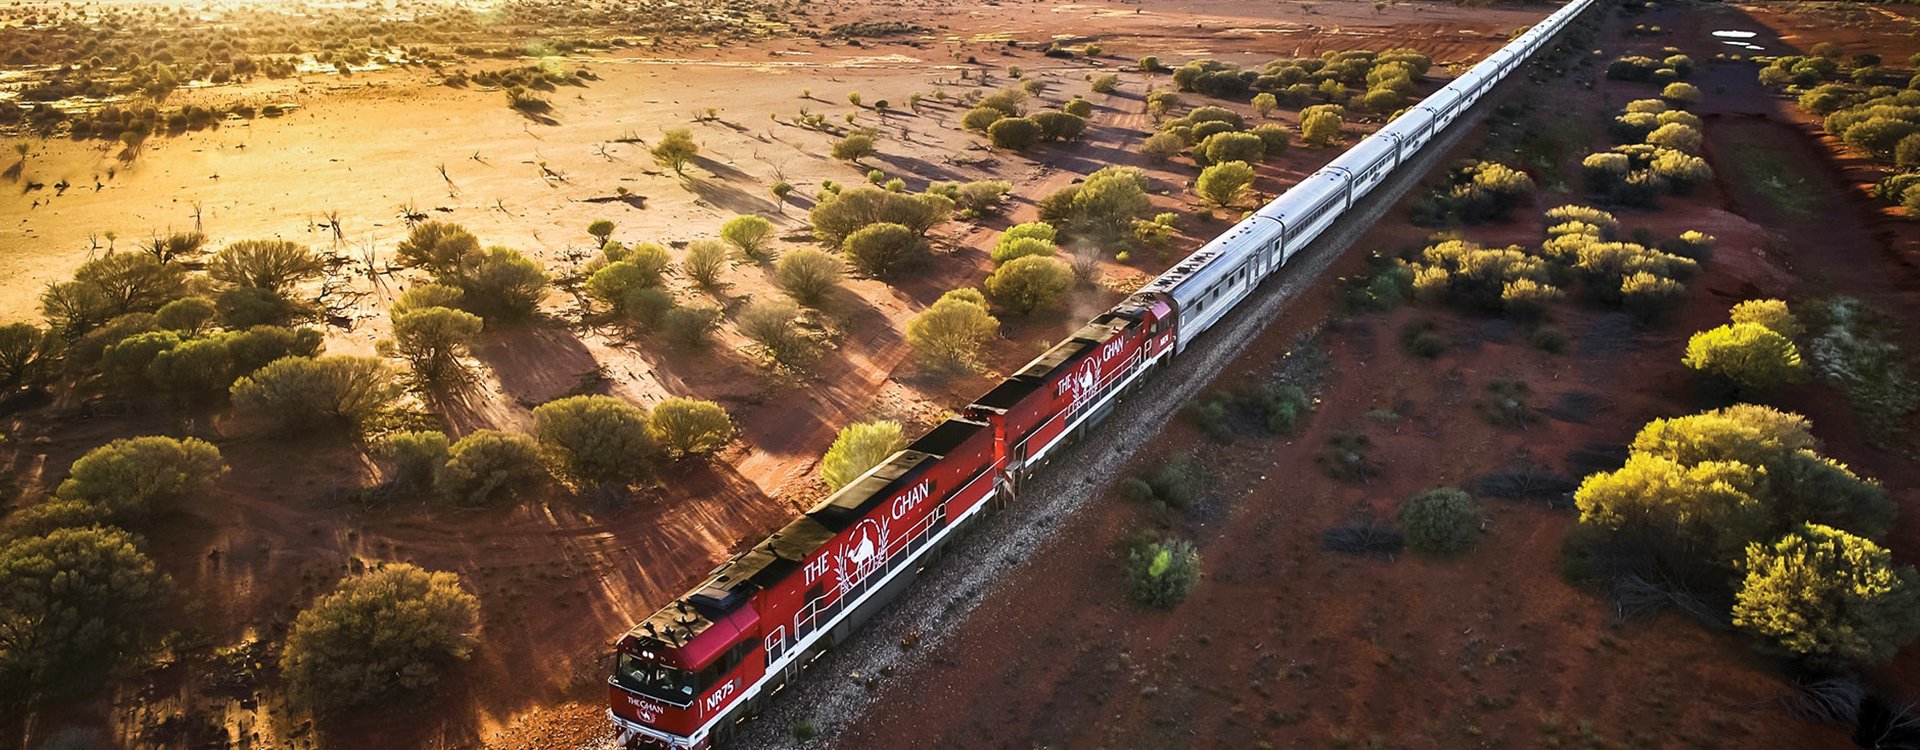 The Ghan_Trail Journey